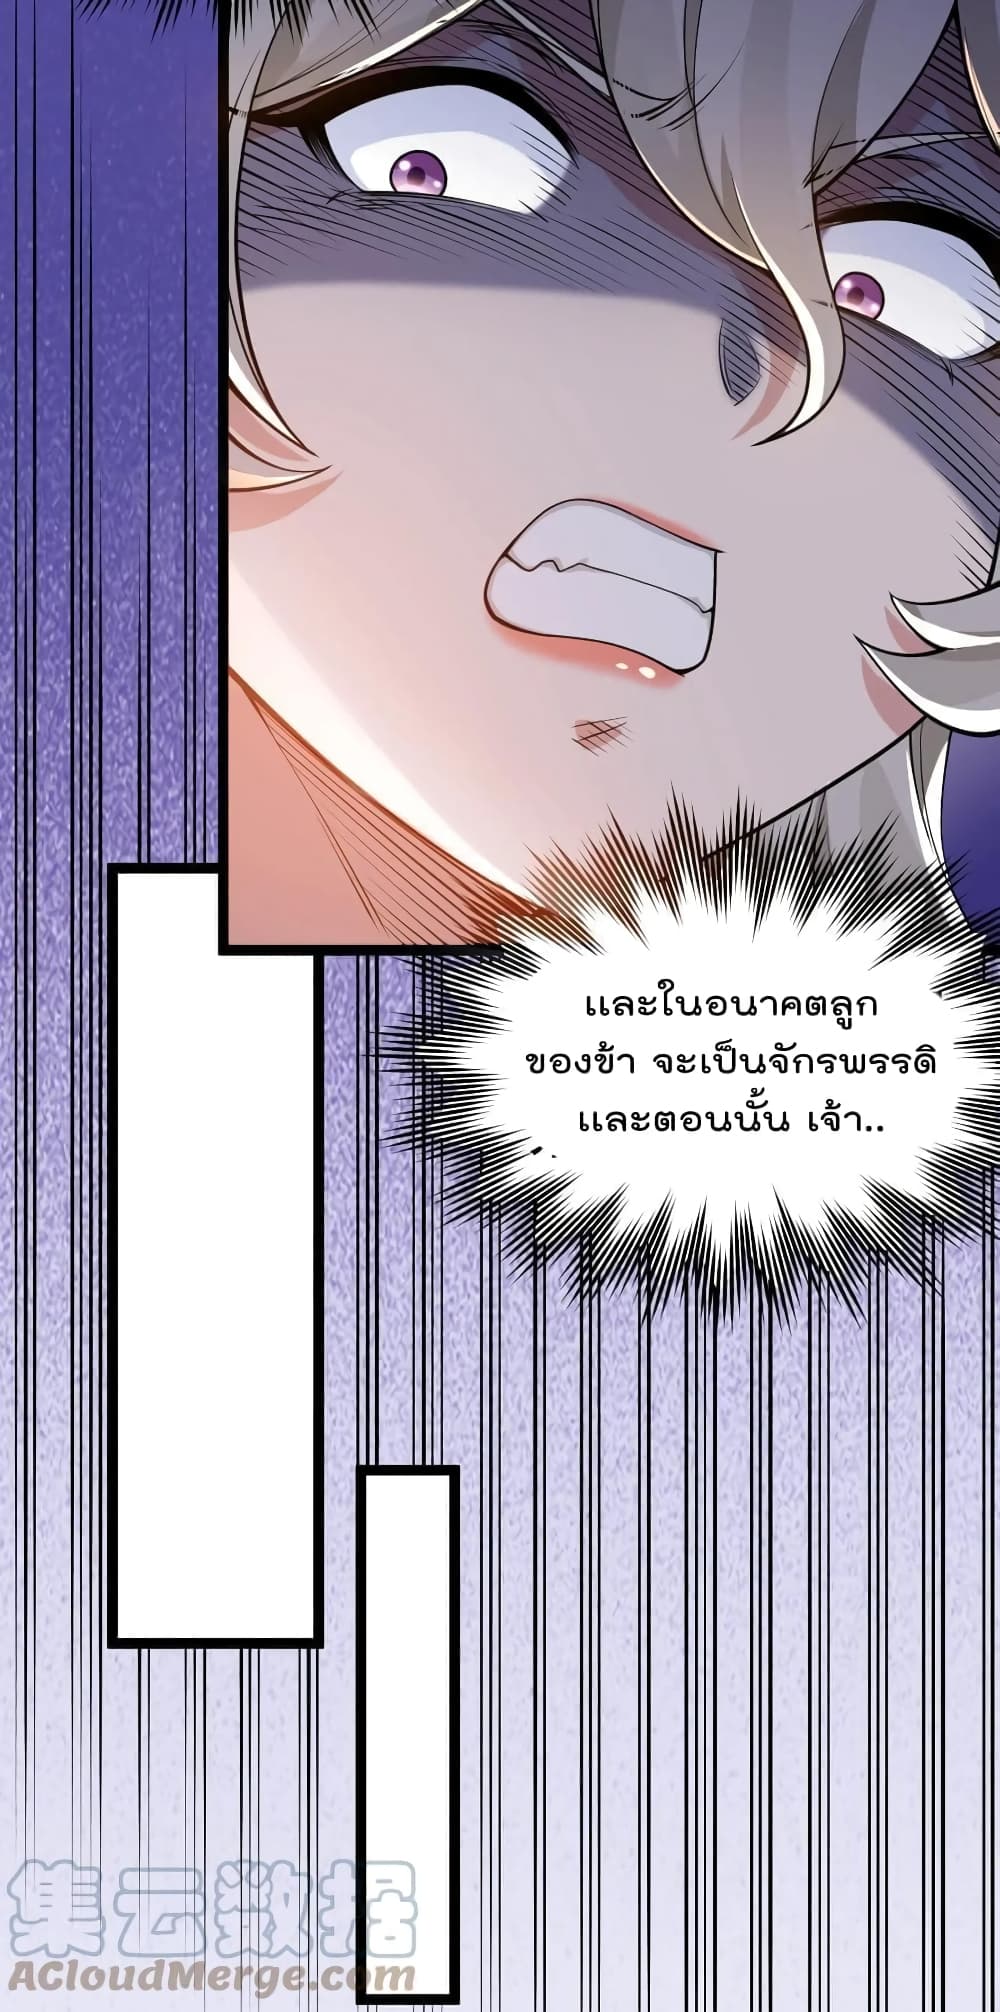 Godsian Masian from Another World ตอนที่ 116 (16)